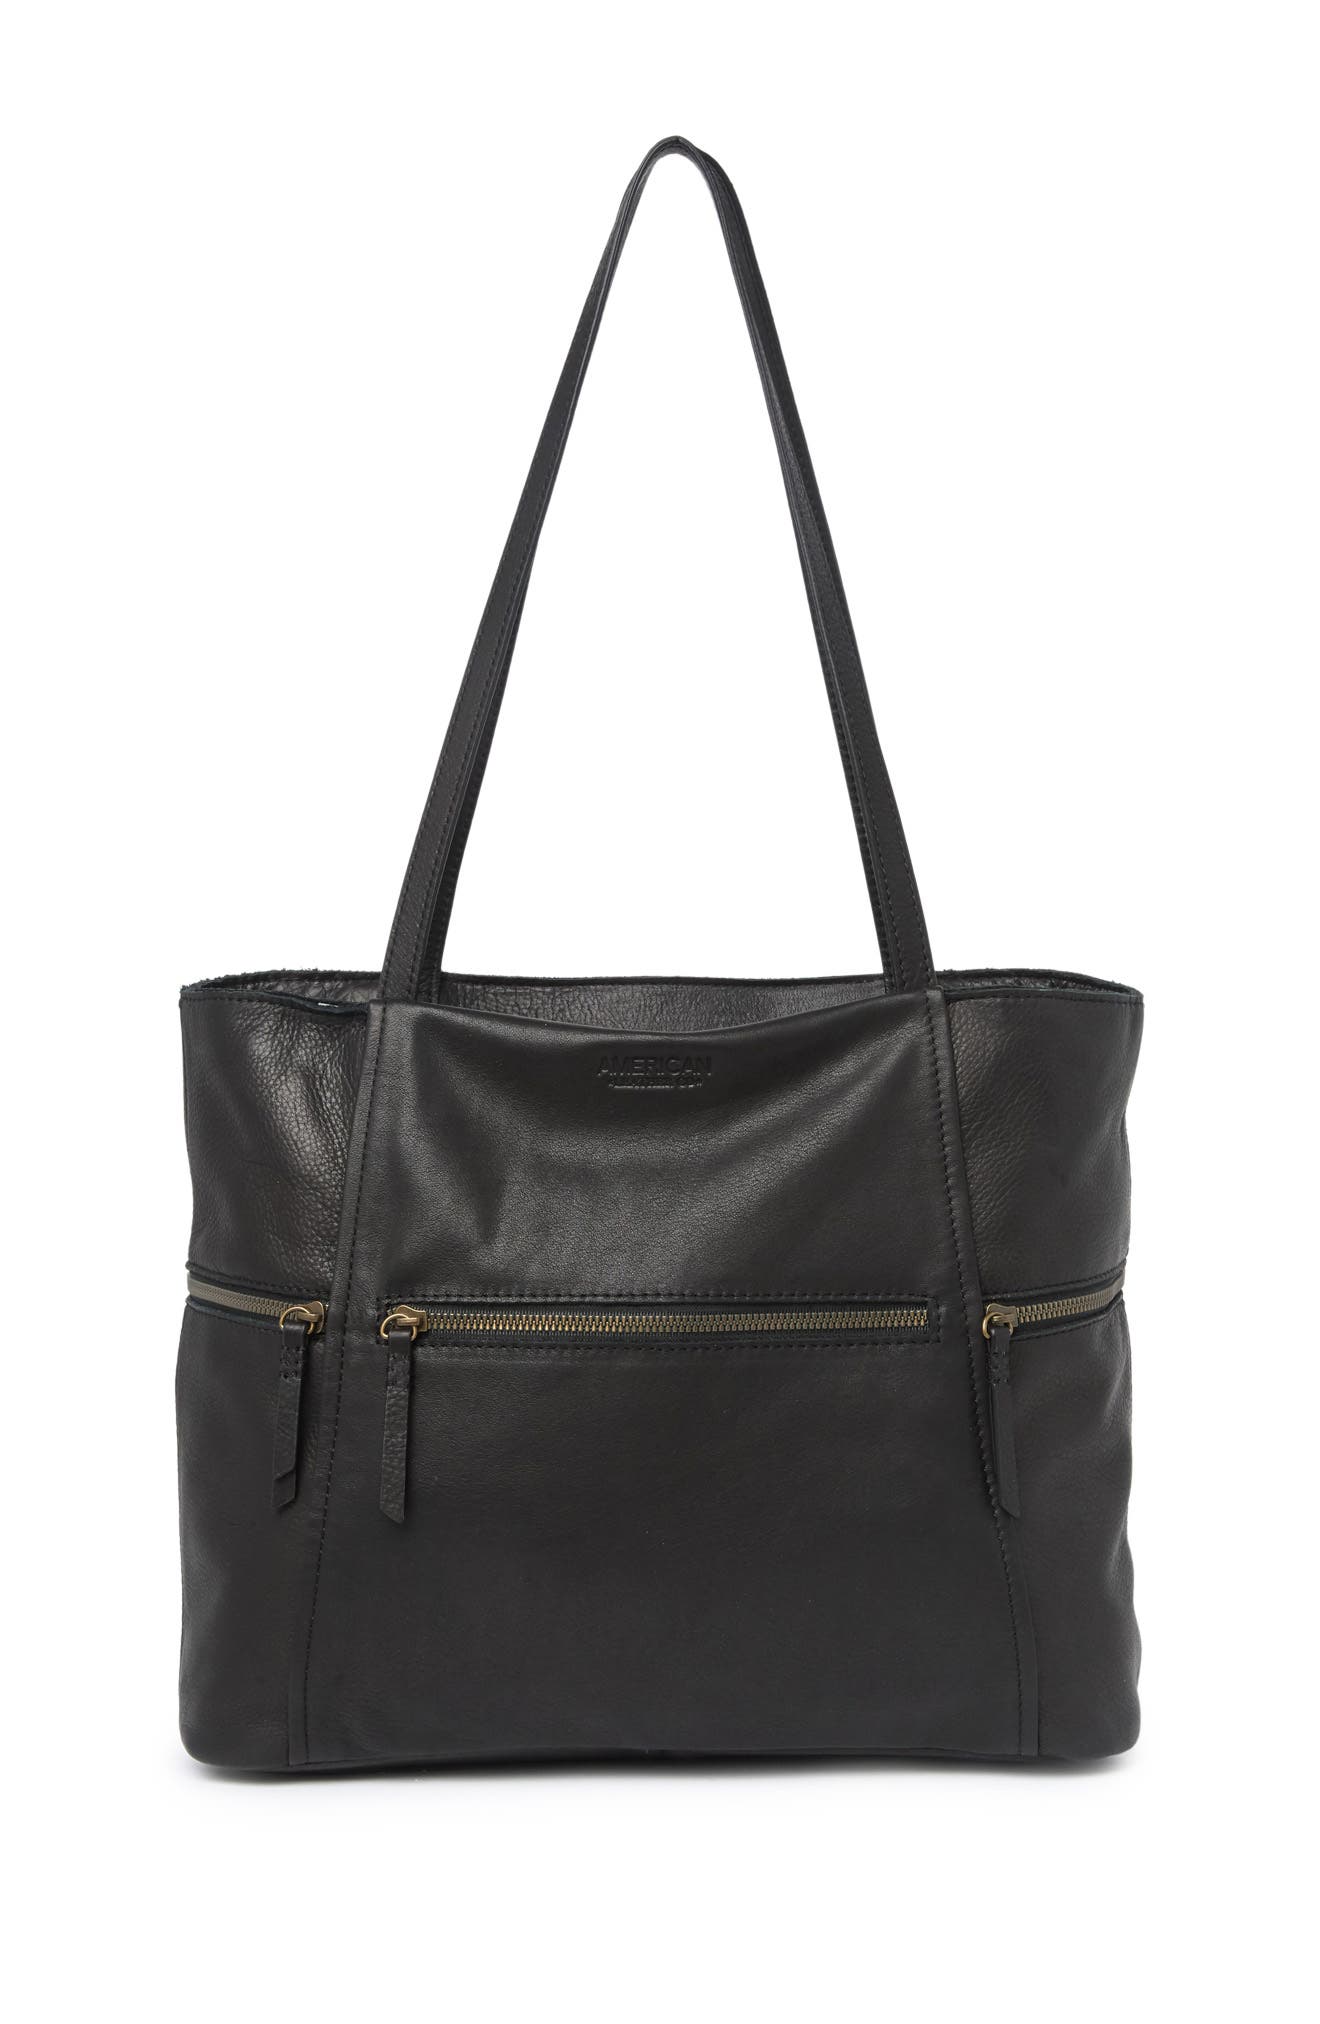 American Leather Co. Eerie Smooth Leather Tote Bag In Oxford1